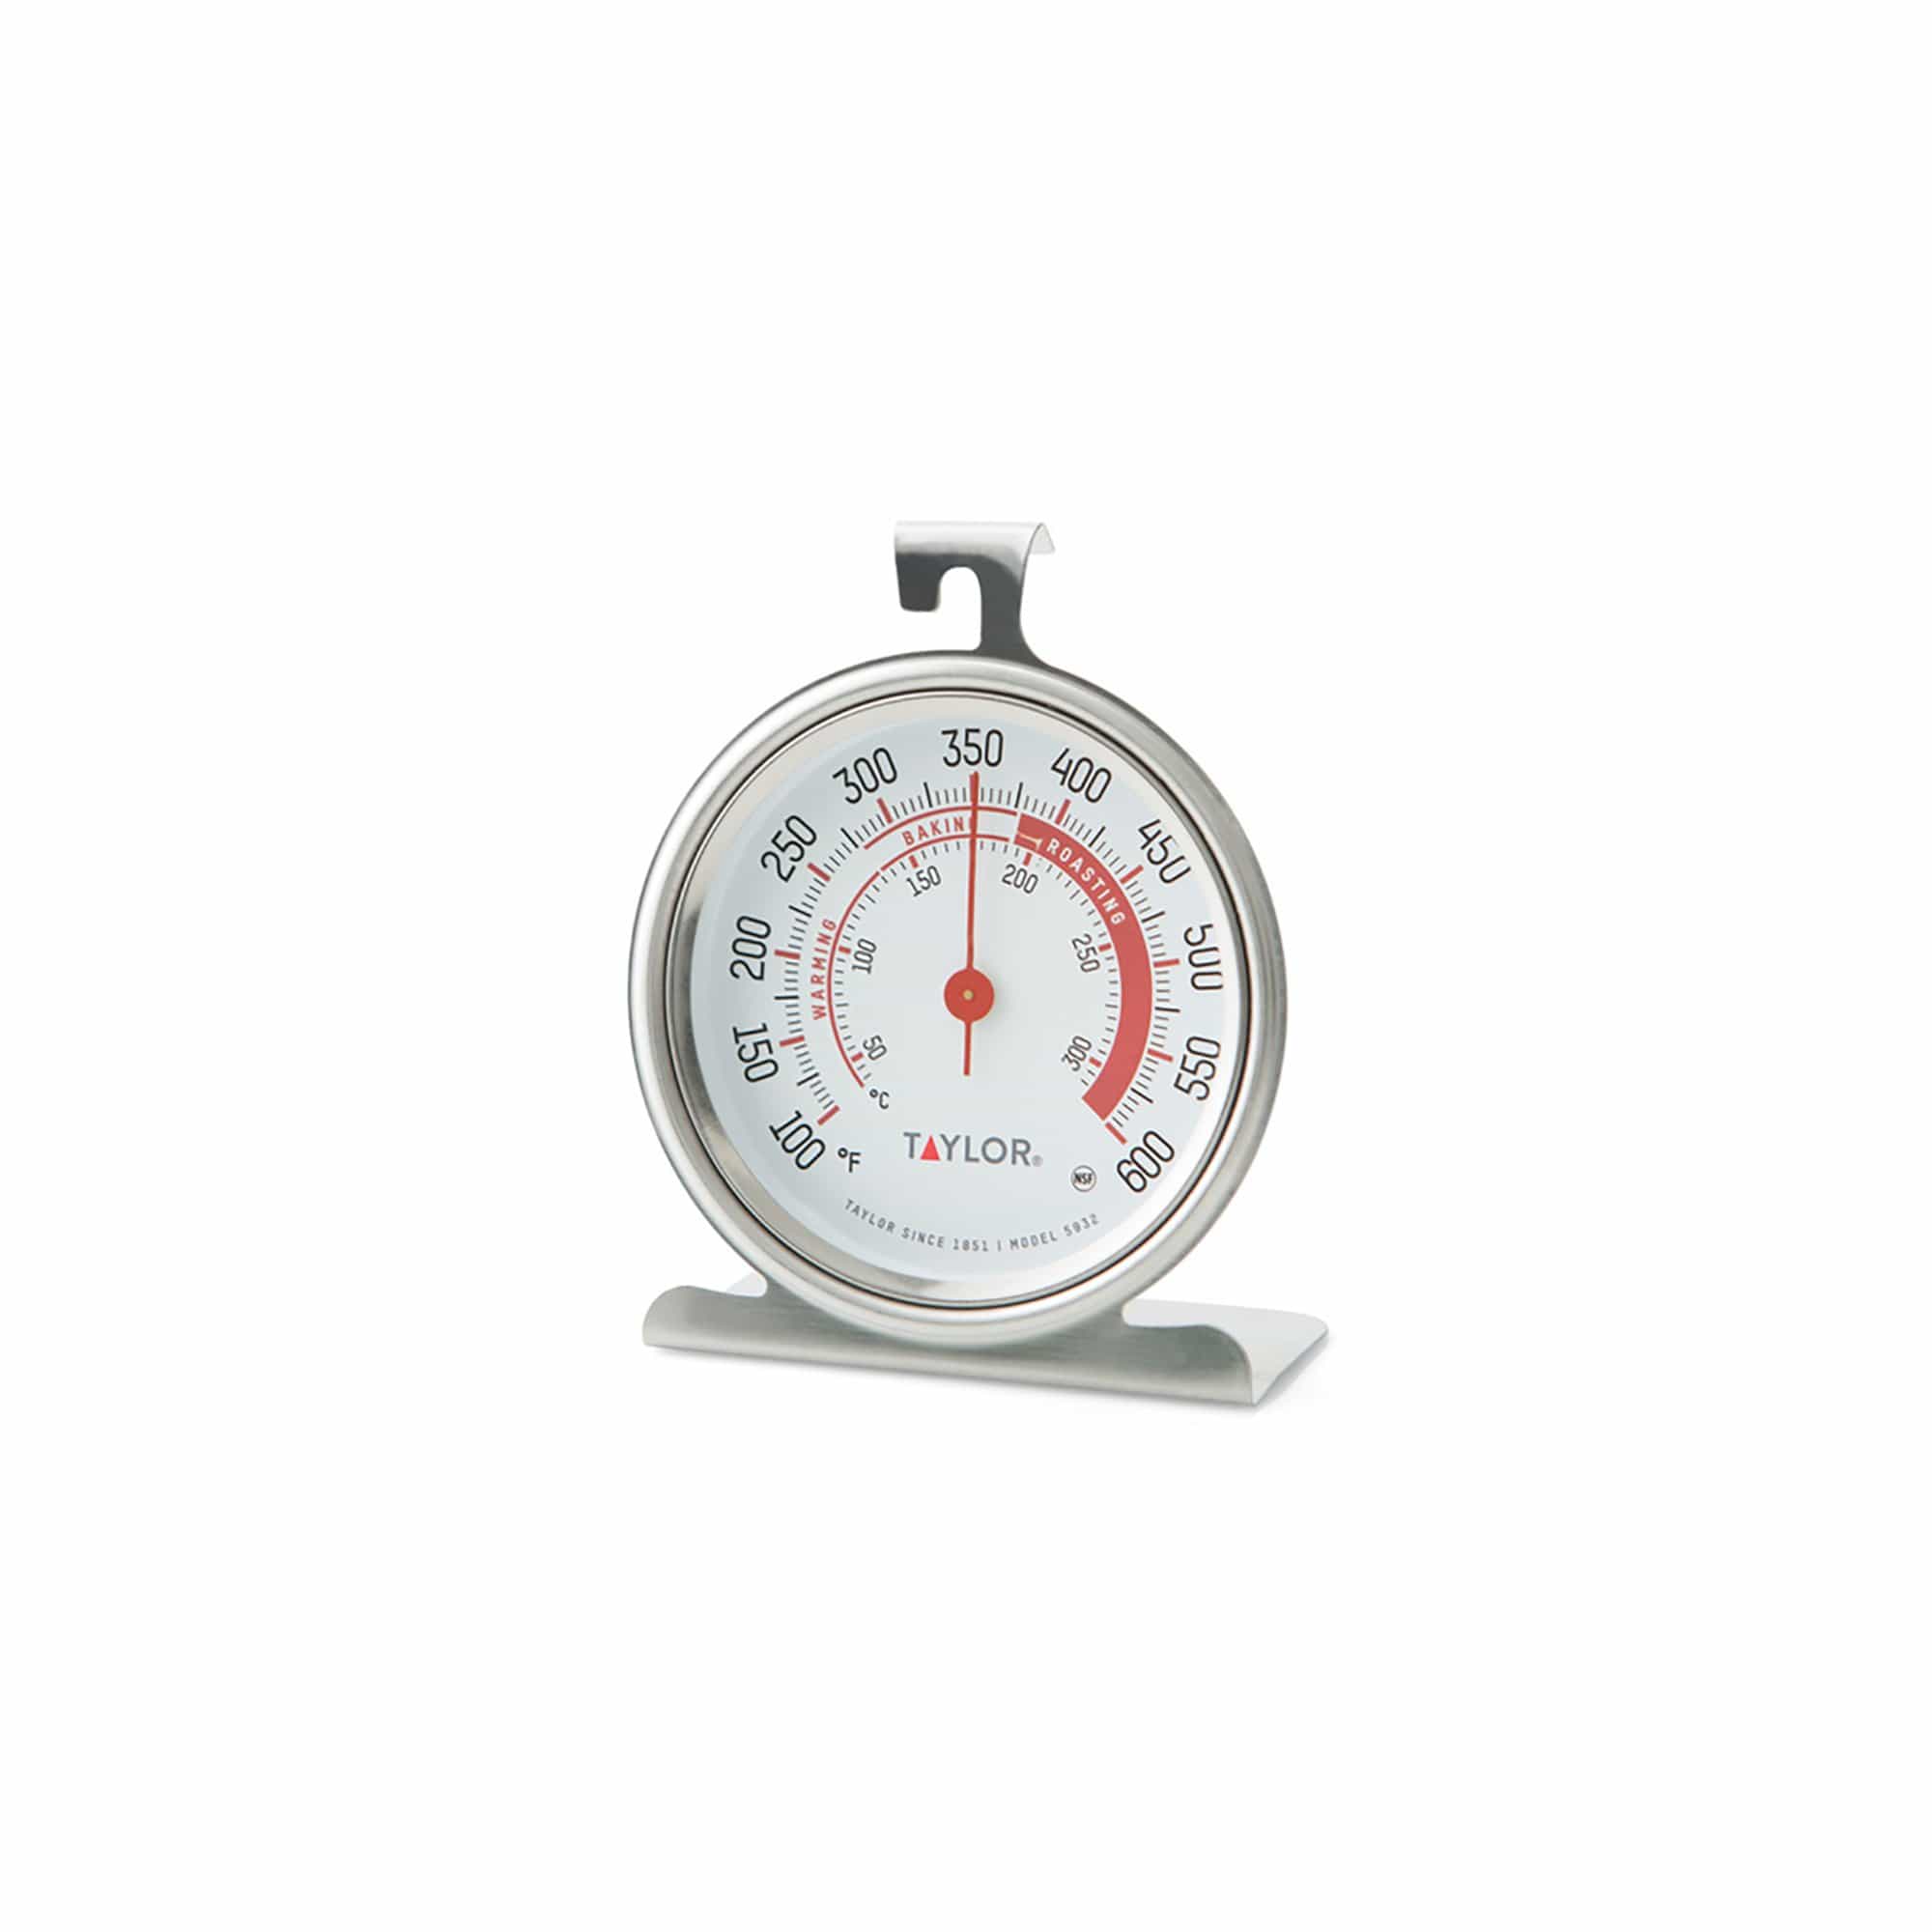 Taylor Digital Oven Kitchen Thermometer - Farm & Home Hardware